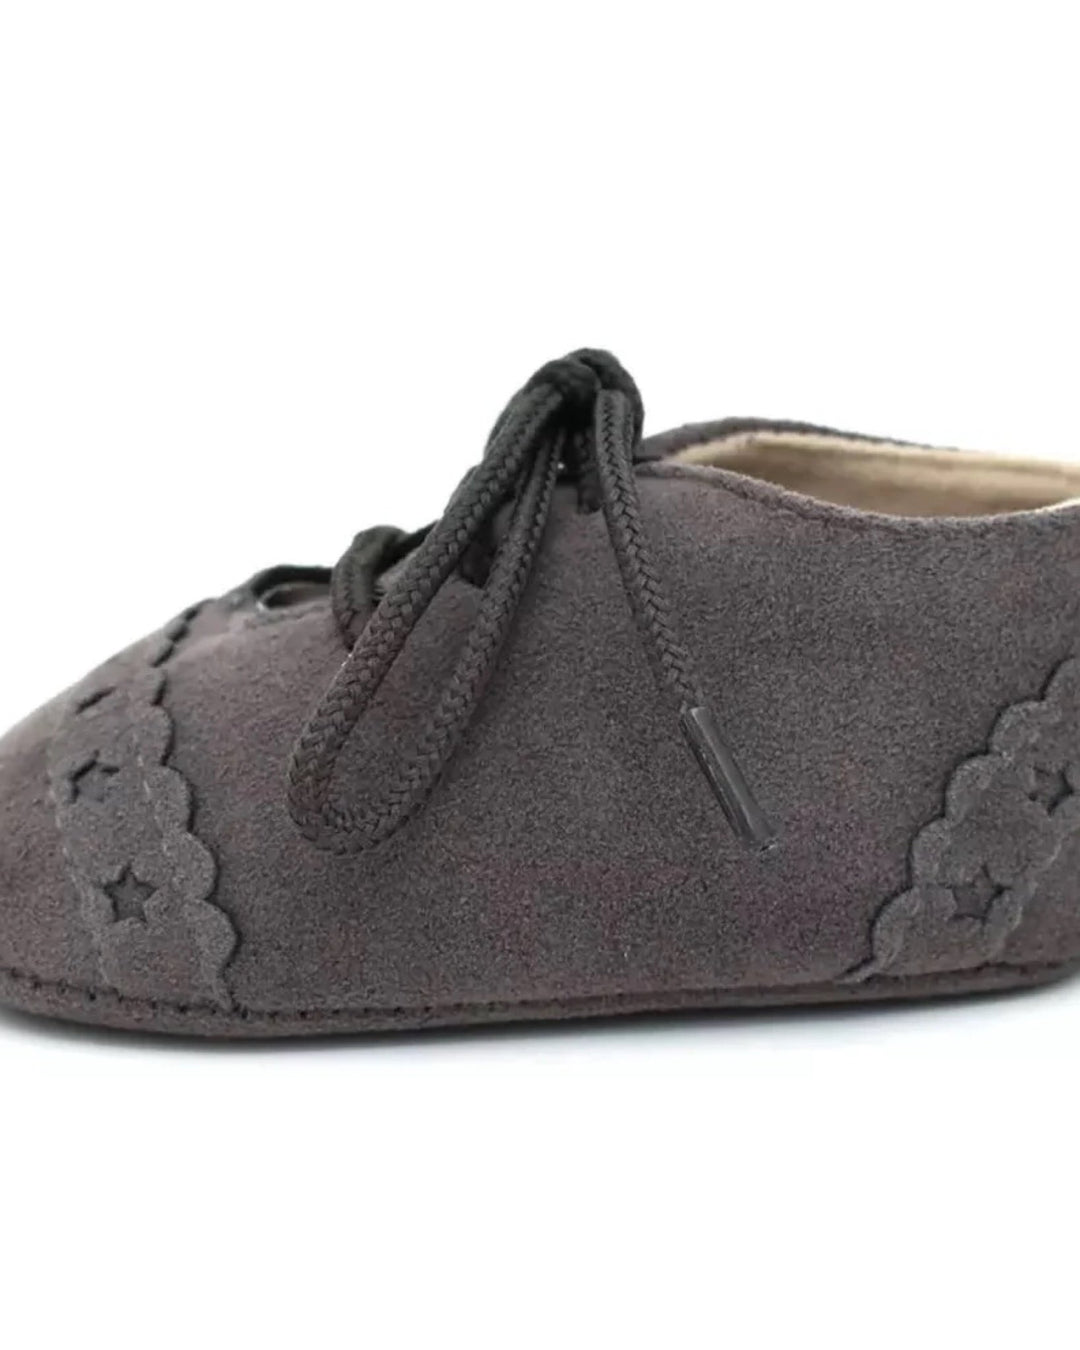 Suede Baby Oxfords, Charcoal - Baby Shoes - LUCKY PANDA KIDS